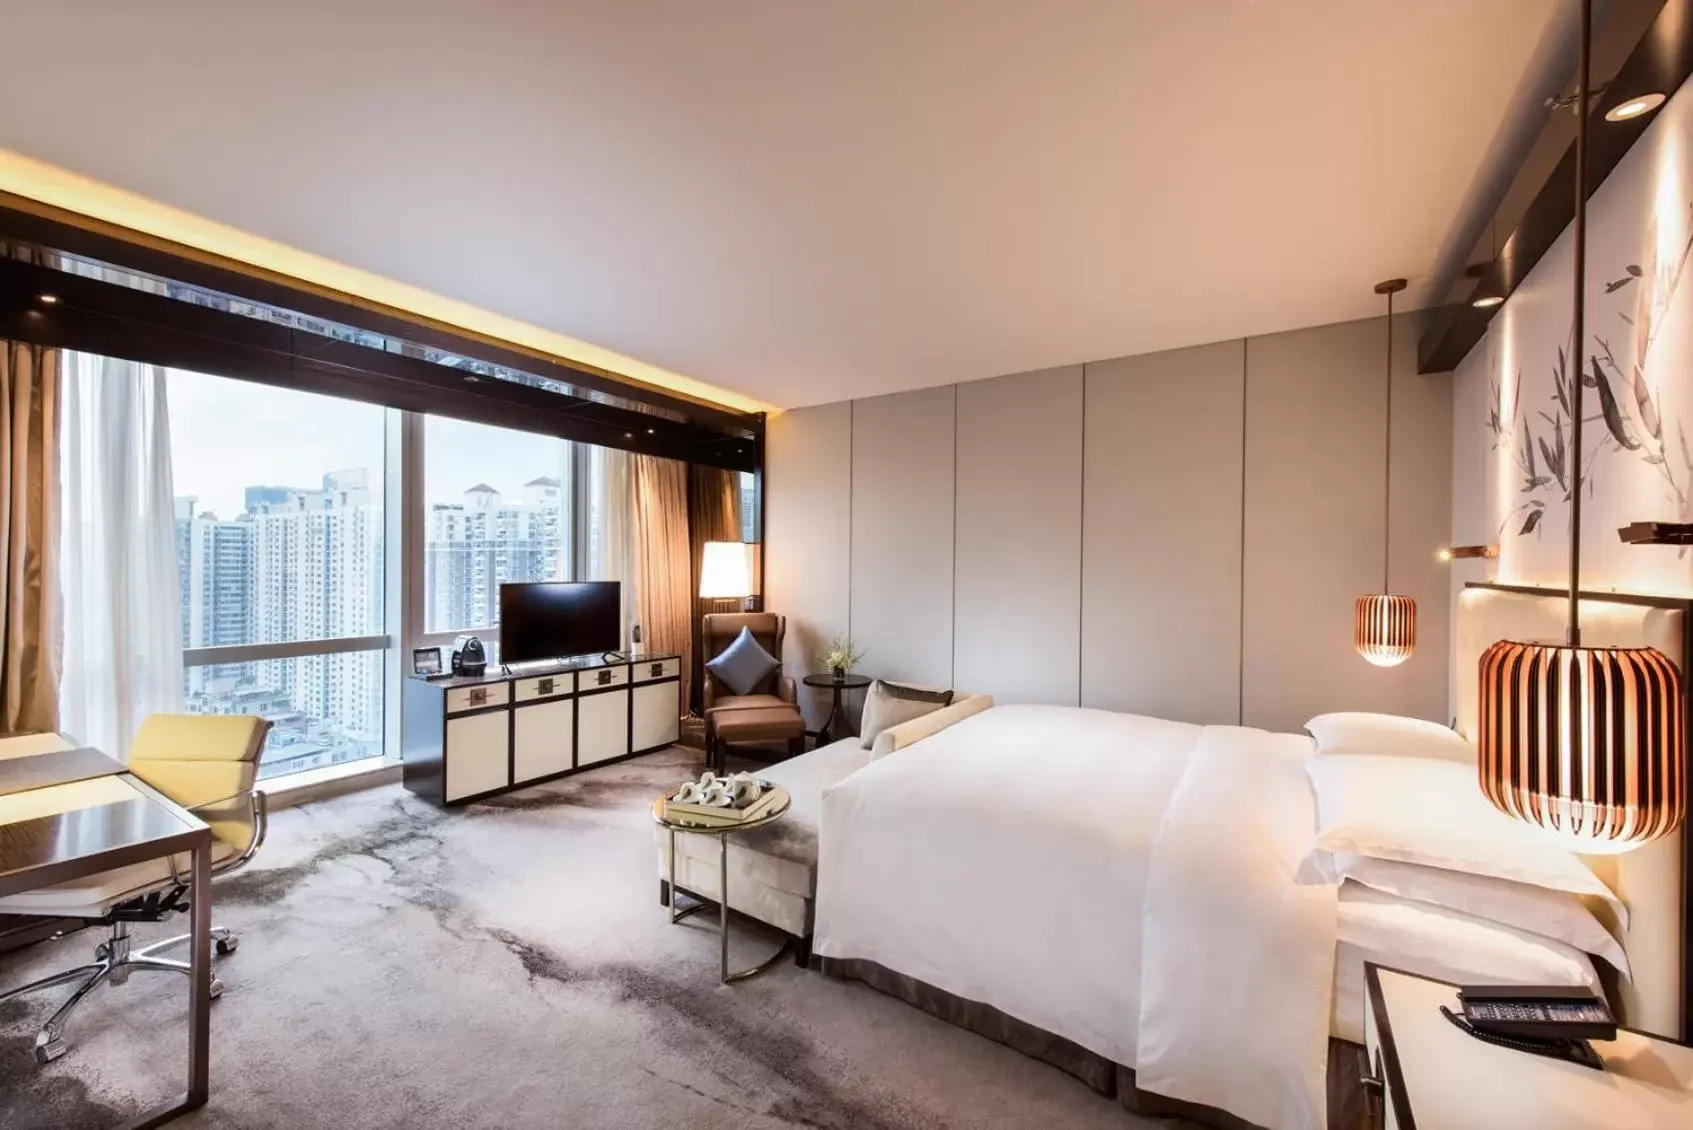 Bed in Hilton Shenzhen Futian, Metro Station at Hotel Front Door, Close to Futian Convention & Exhibition Center